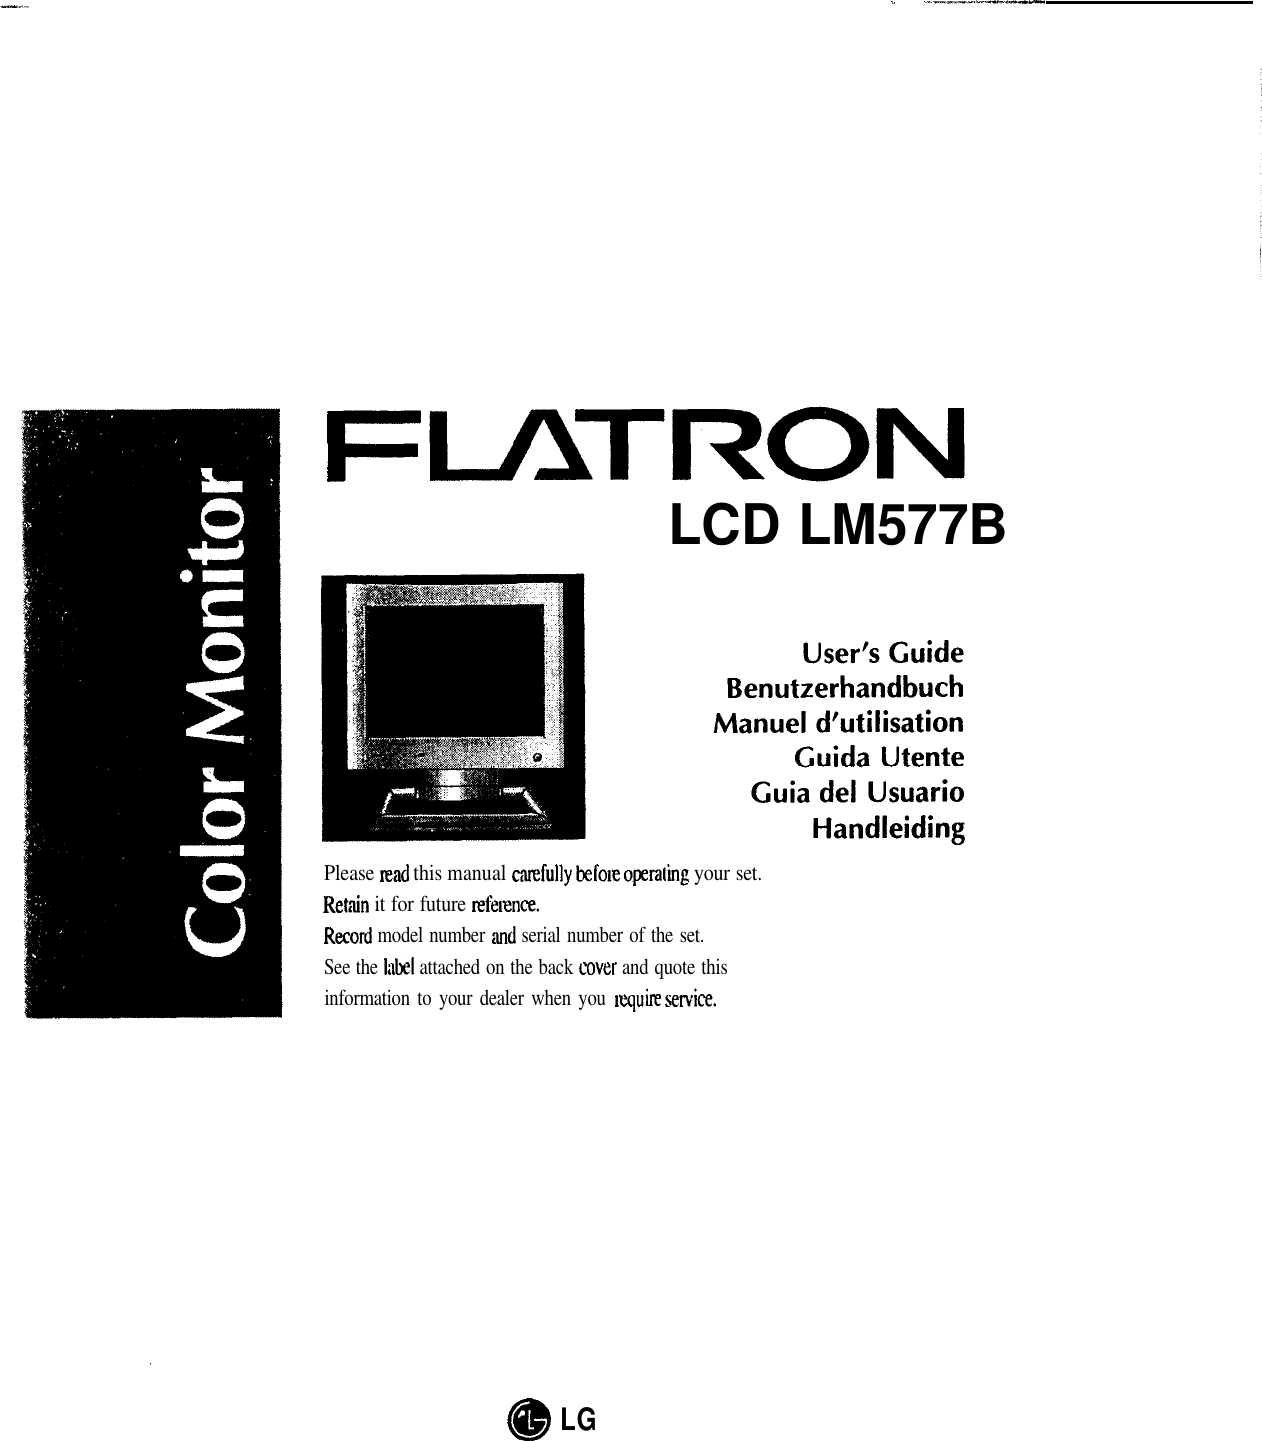 ,. x -___-_-l-FLAJ-RONLCD LM577BPlease read this manual catzfully befoole operaling your set.Retain it for future refexnce.Recorcl model number ‘and serial number of the set.See the Iilk1 attached on the back cxwer and quote thisinformation to your dealer when you nzquire Lw;ervice.@LG